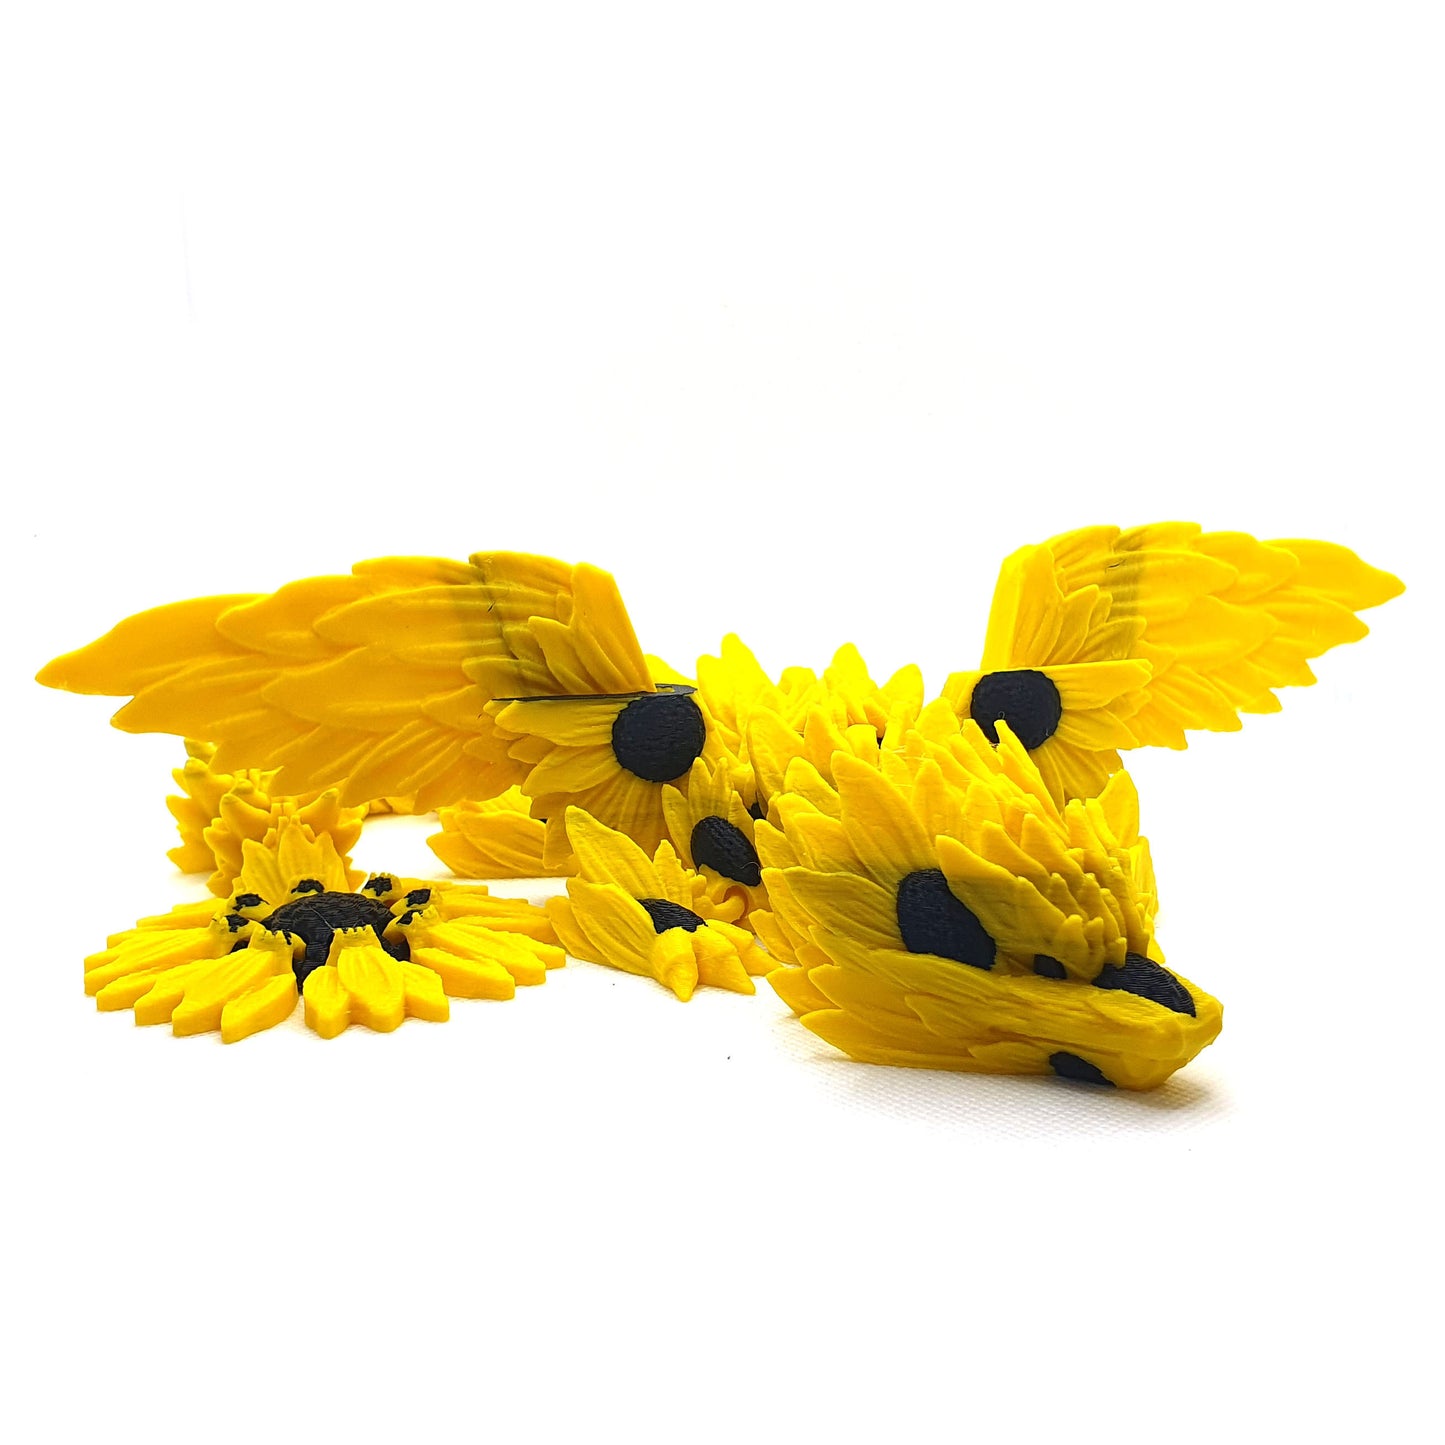 Sunflower Winged Articulated Adult Dragon